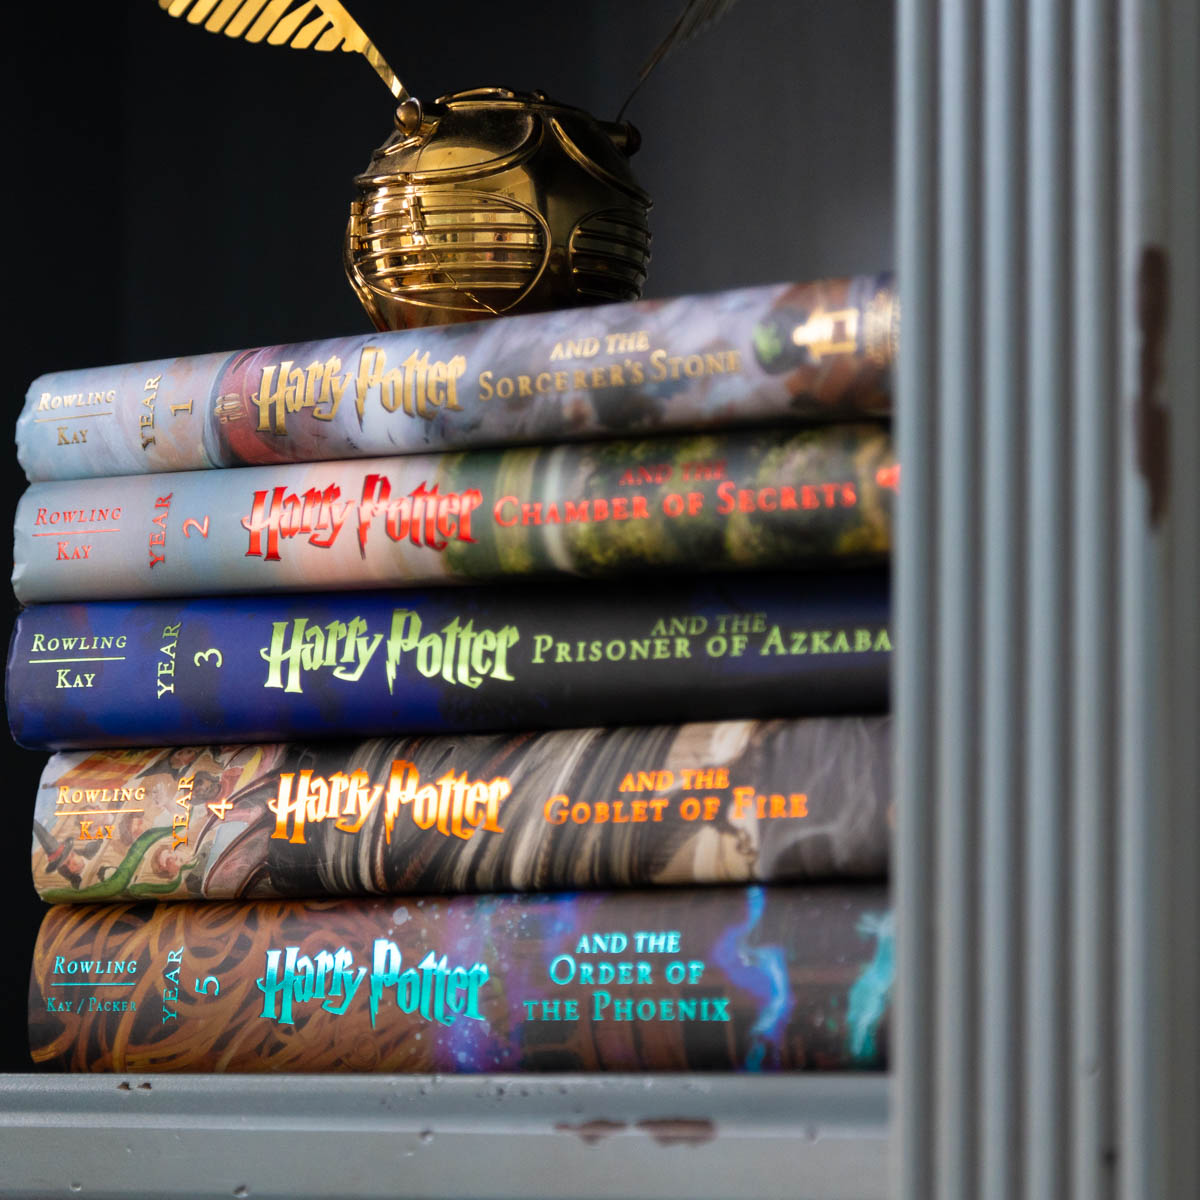 A stack of the Illustrated Harry Potter Books are on a shelf with a golden snitch sitting on top.